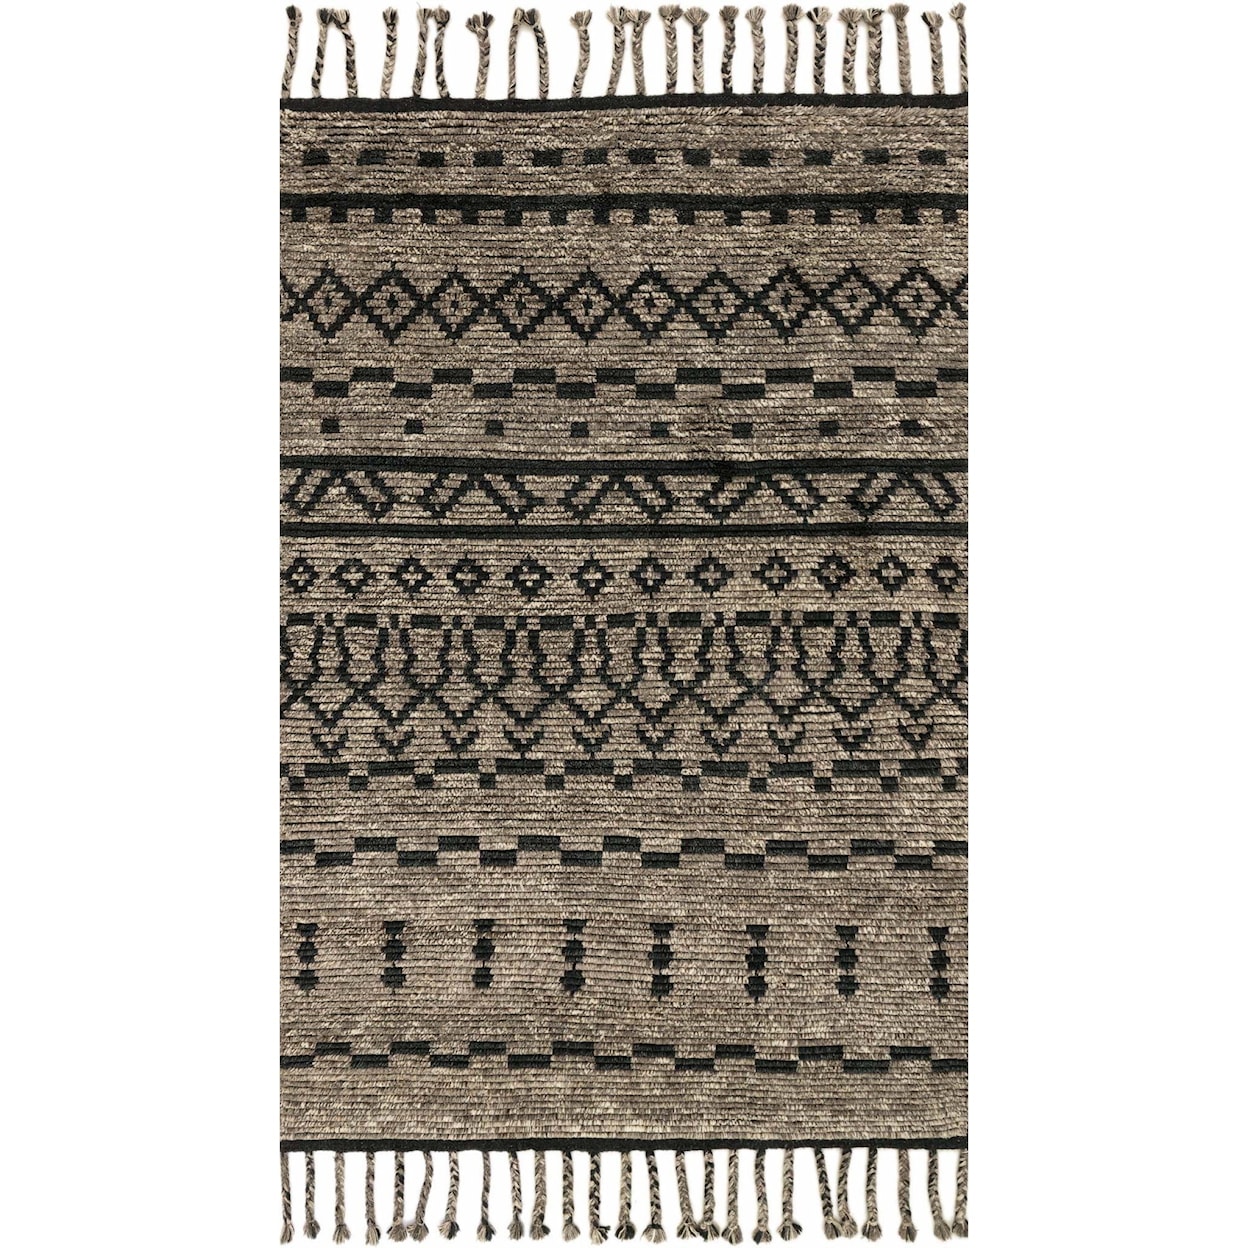 Magnolia Home by Joanna Gaines for Loloi Tulum 4' 0" x 6' 0" Rectangle Rug